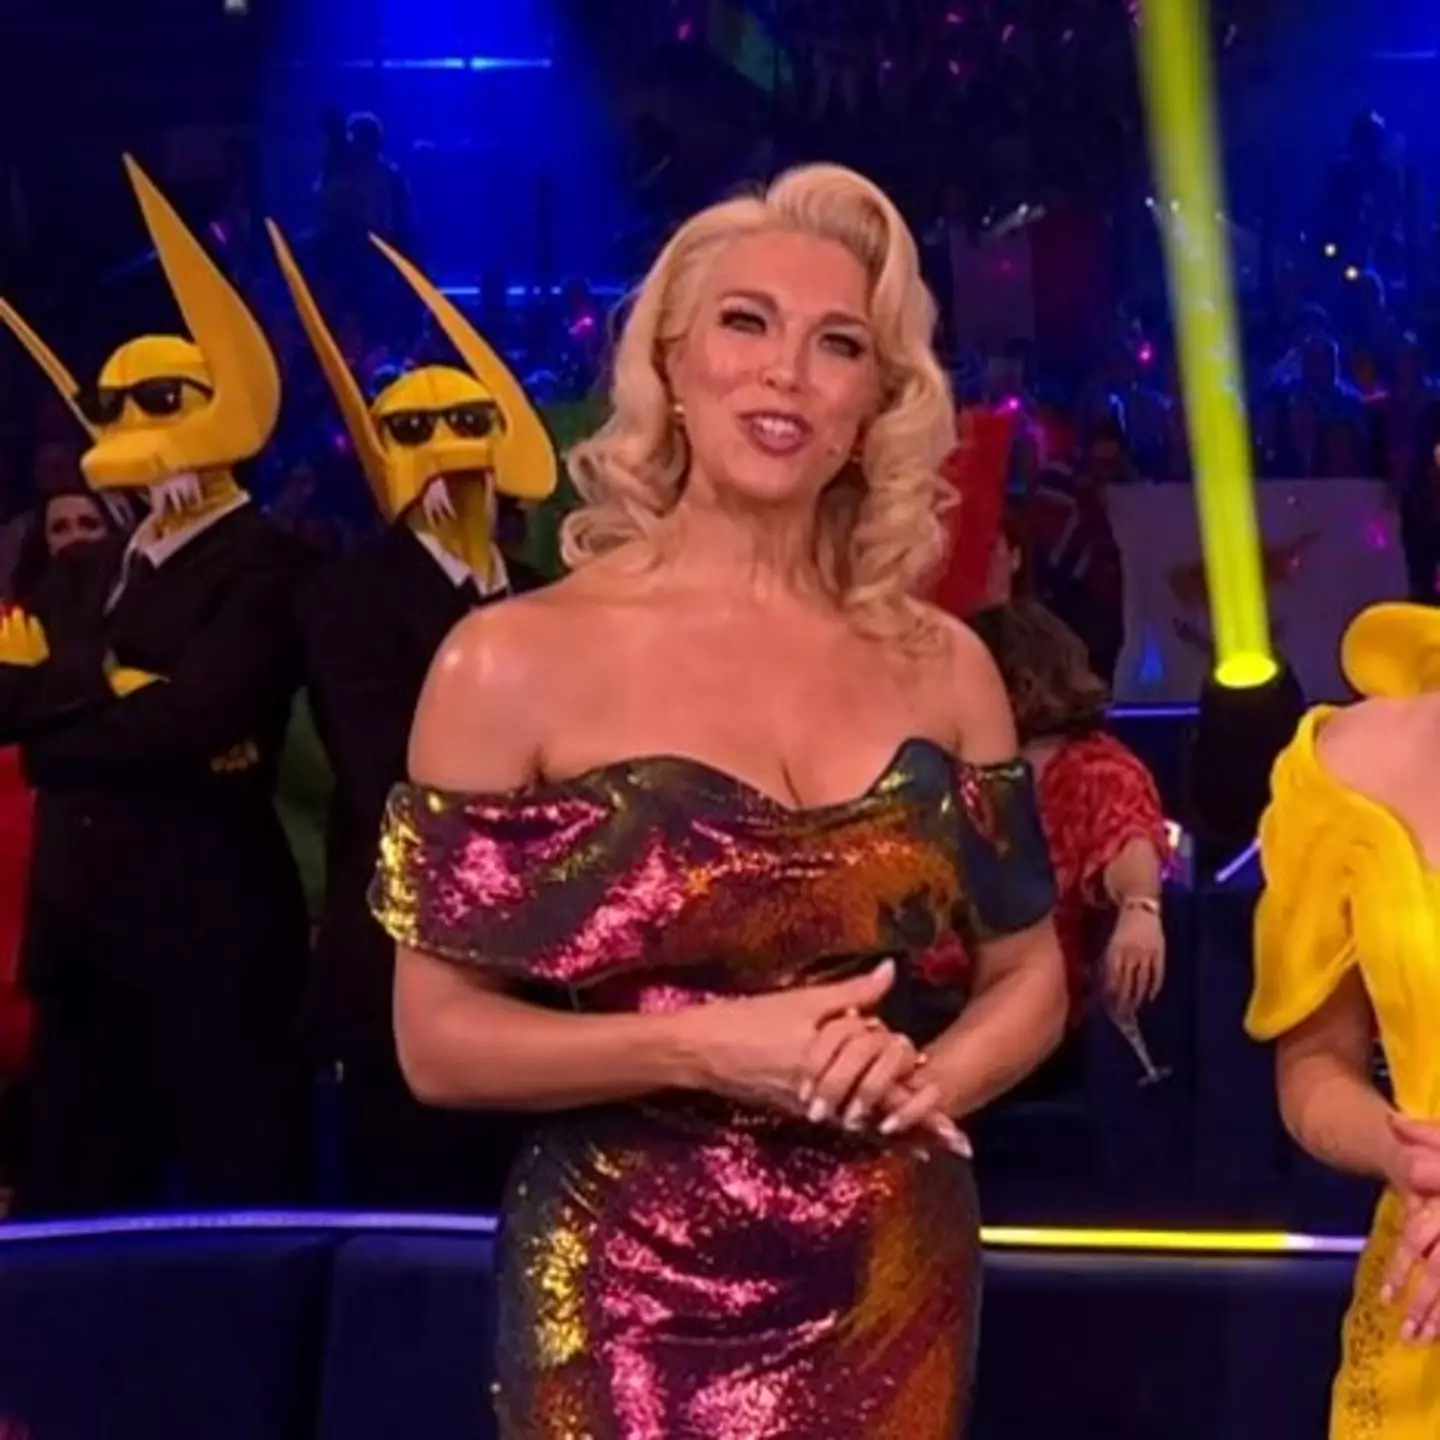 Fans are in awe after Hannah Waddingham changes outfits during Eurovision.